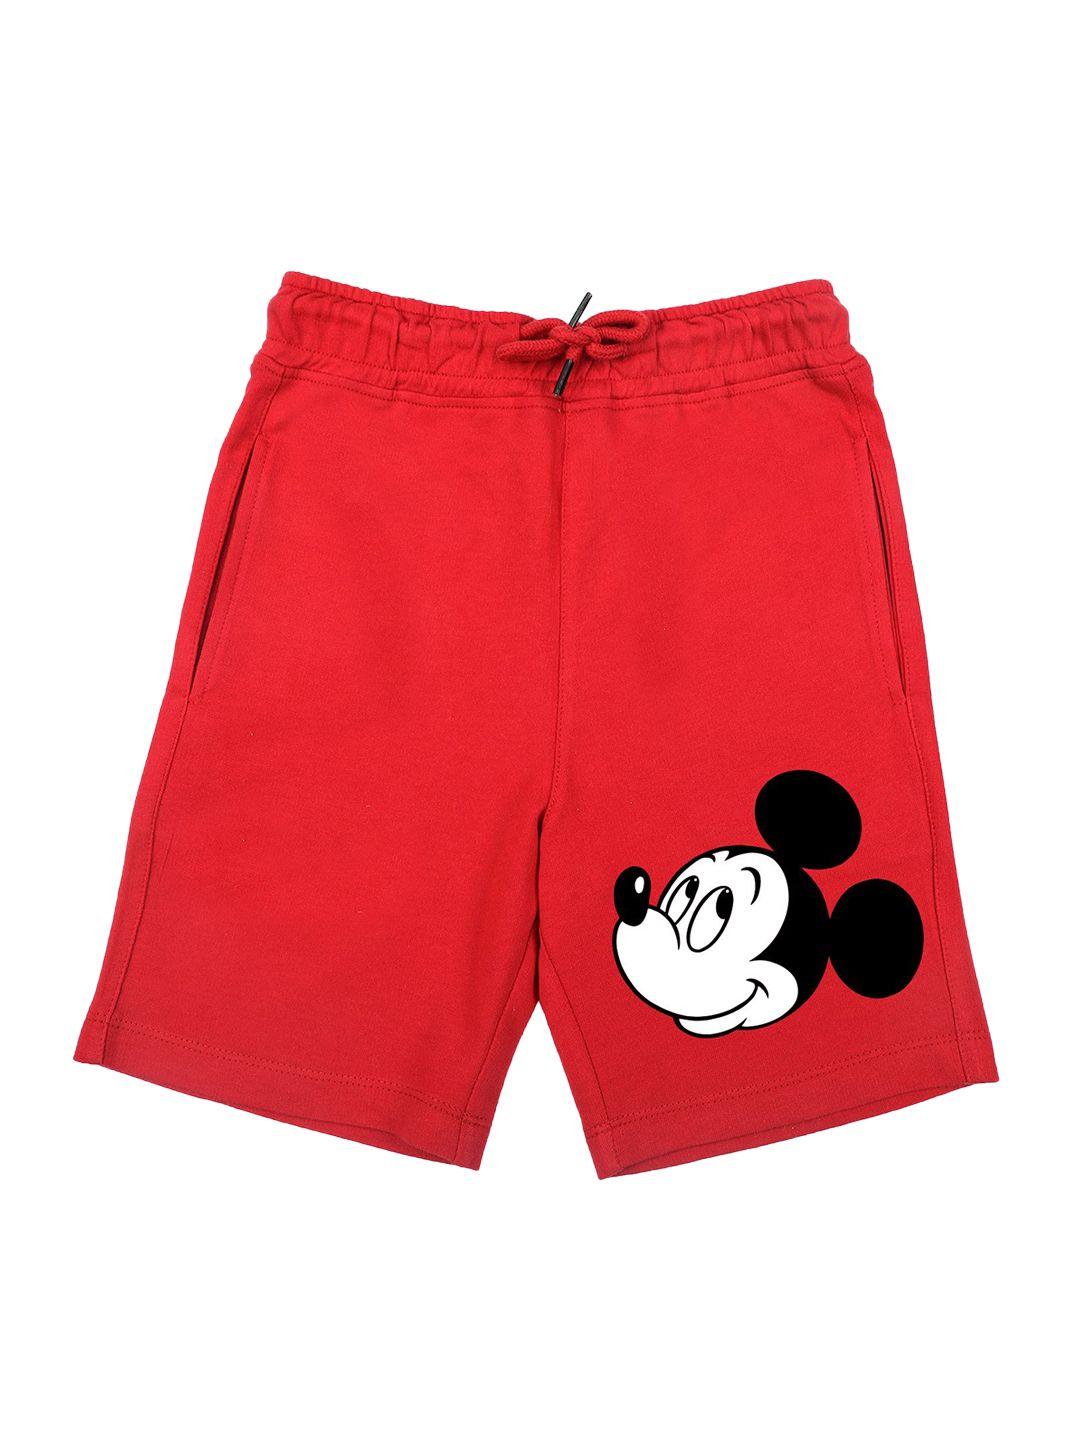 disney by wear your mind boys red regular fit printed mickey mouse cotton shorts